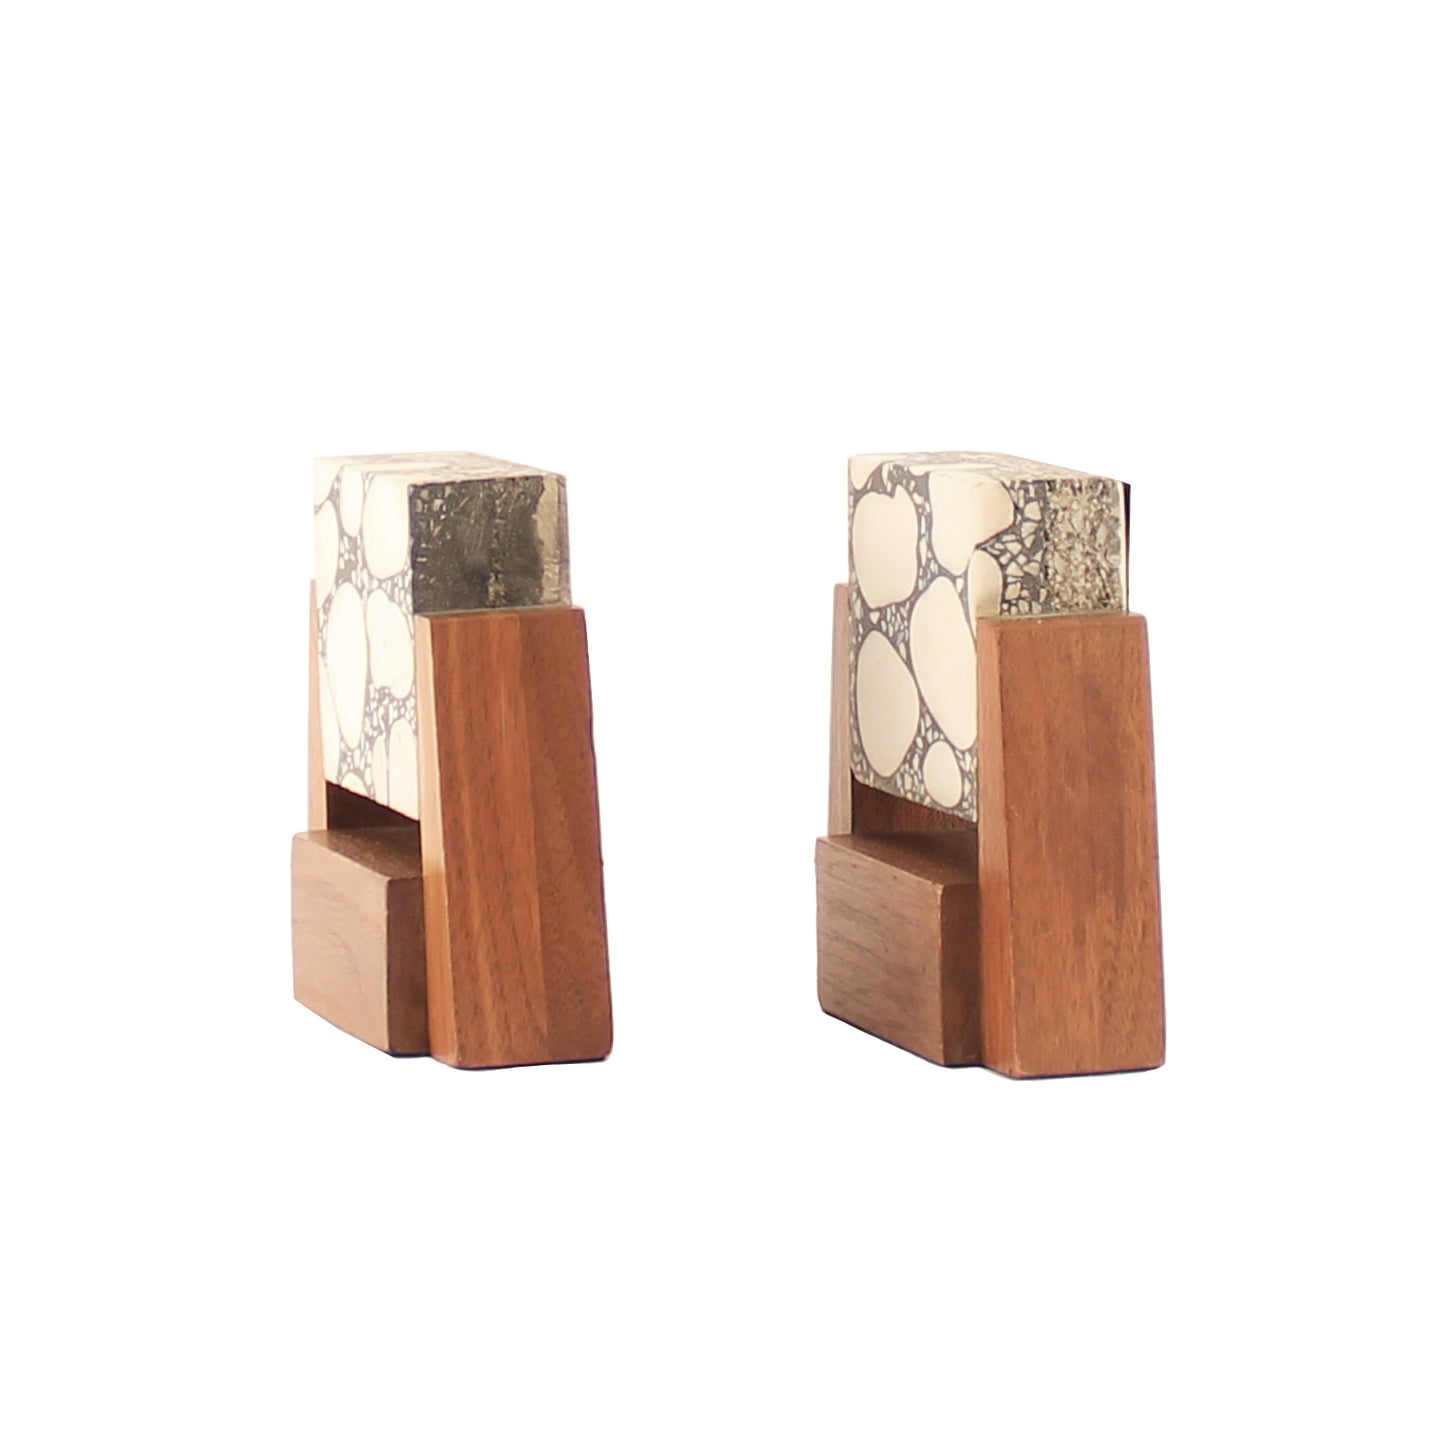 Magnificent Art Deco Stone Marble and Walnut Bookends